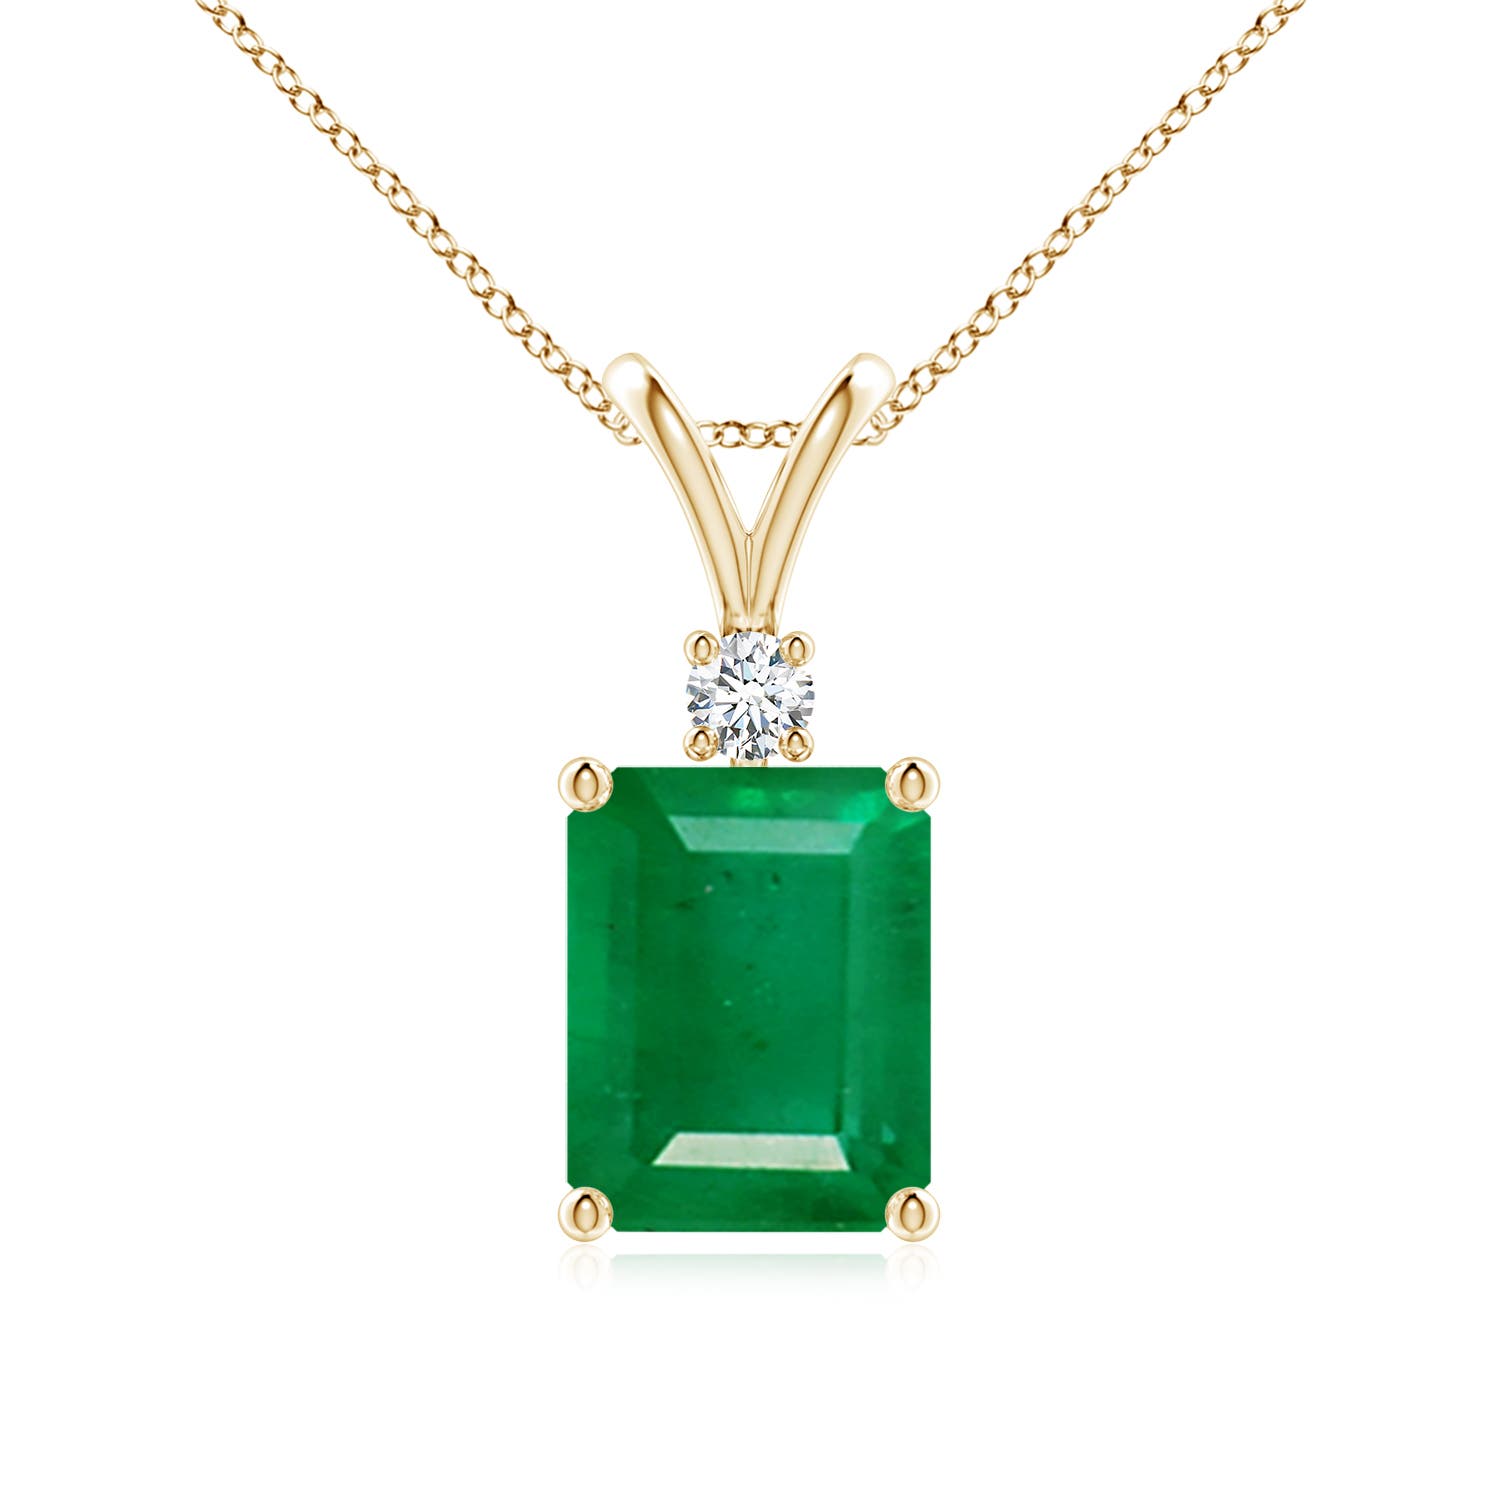 AA - Emerald / 2.32 CT / 14 KT Yellow Gold